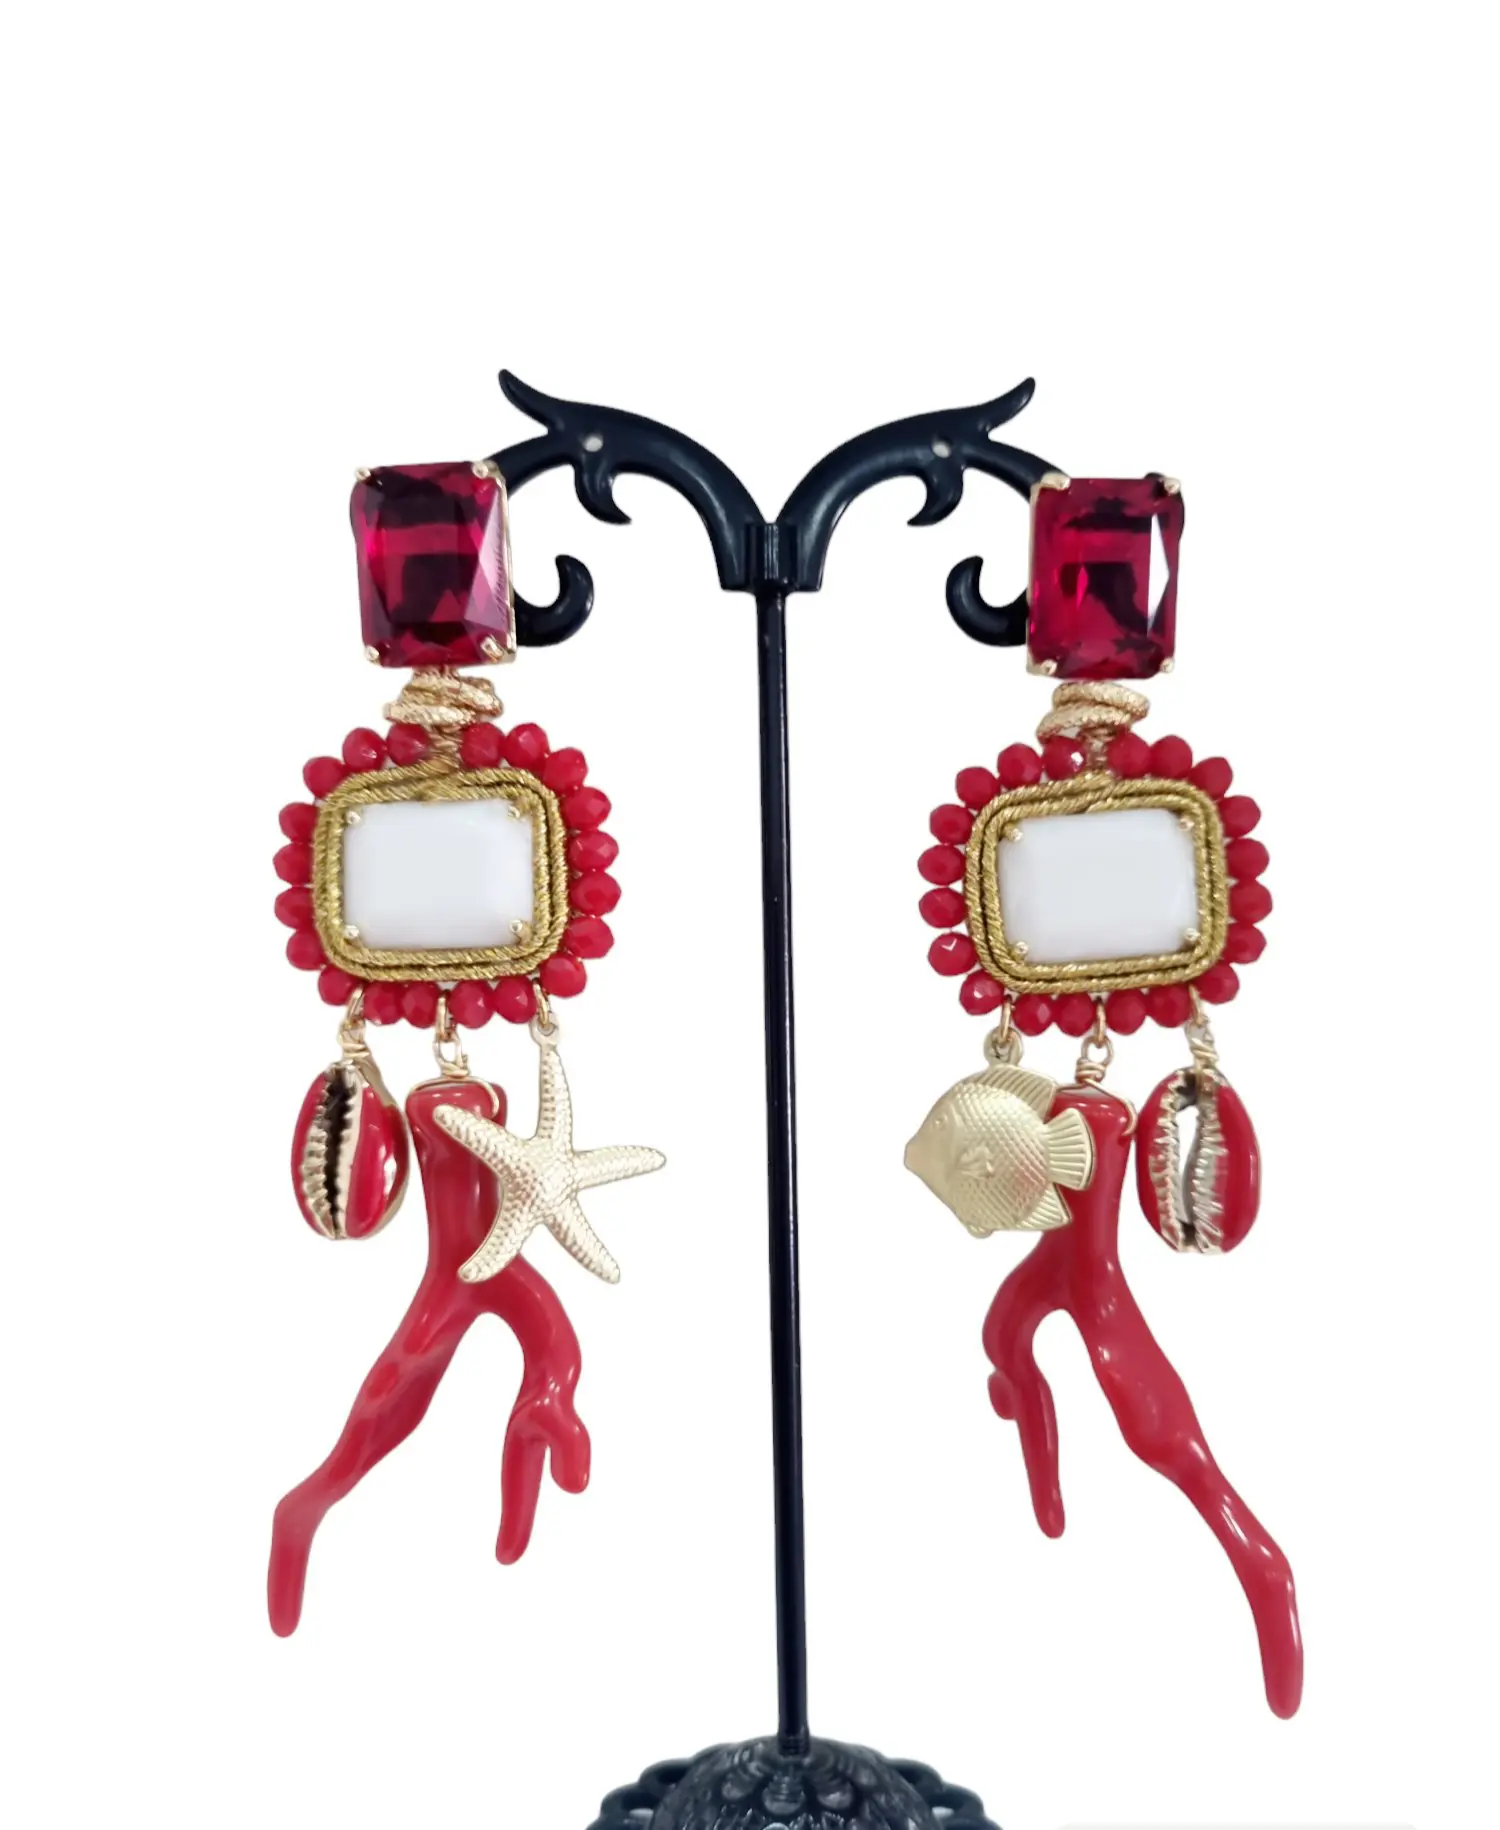 Earrings handcrafted with crystals, resins and enamelled and golden charms. Length 9.5cm Weight 12g